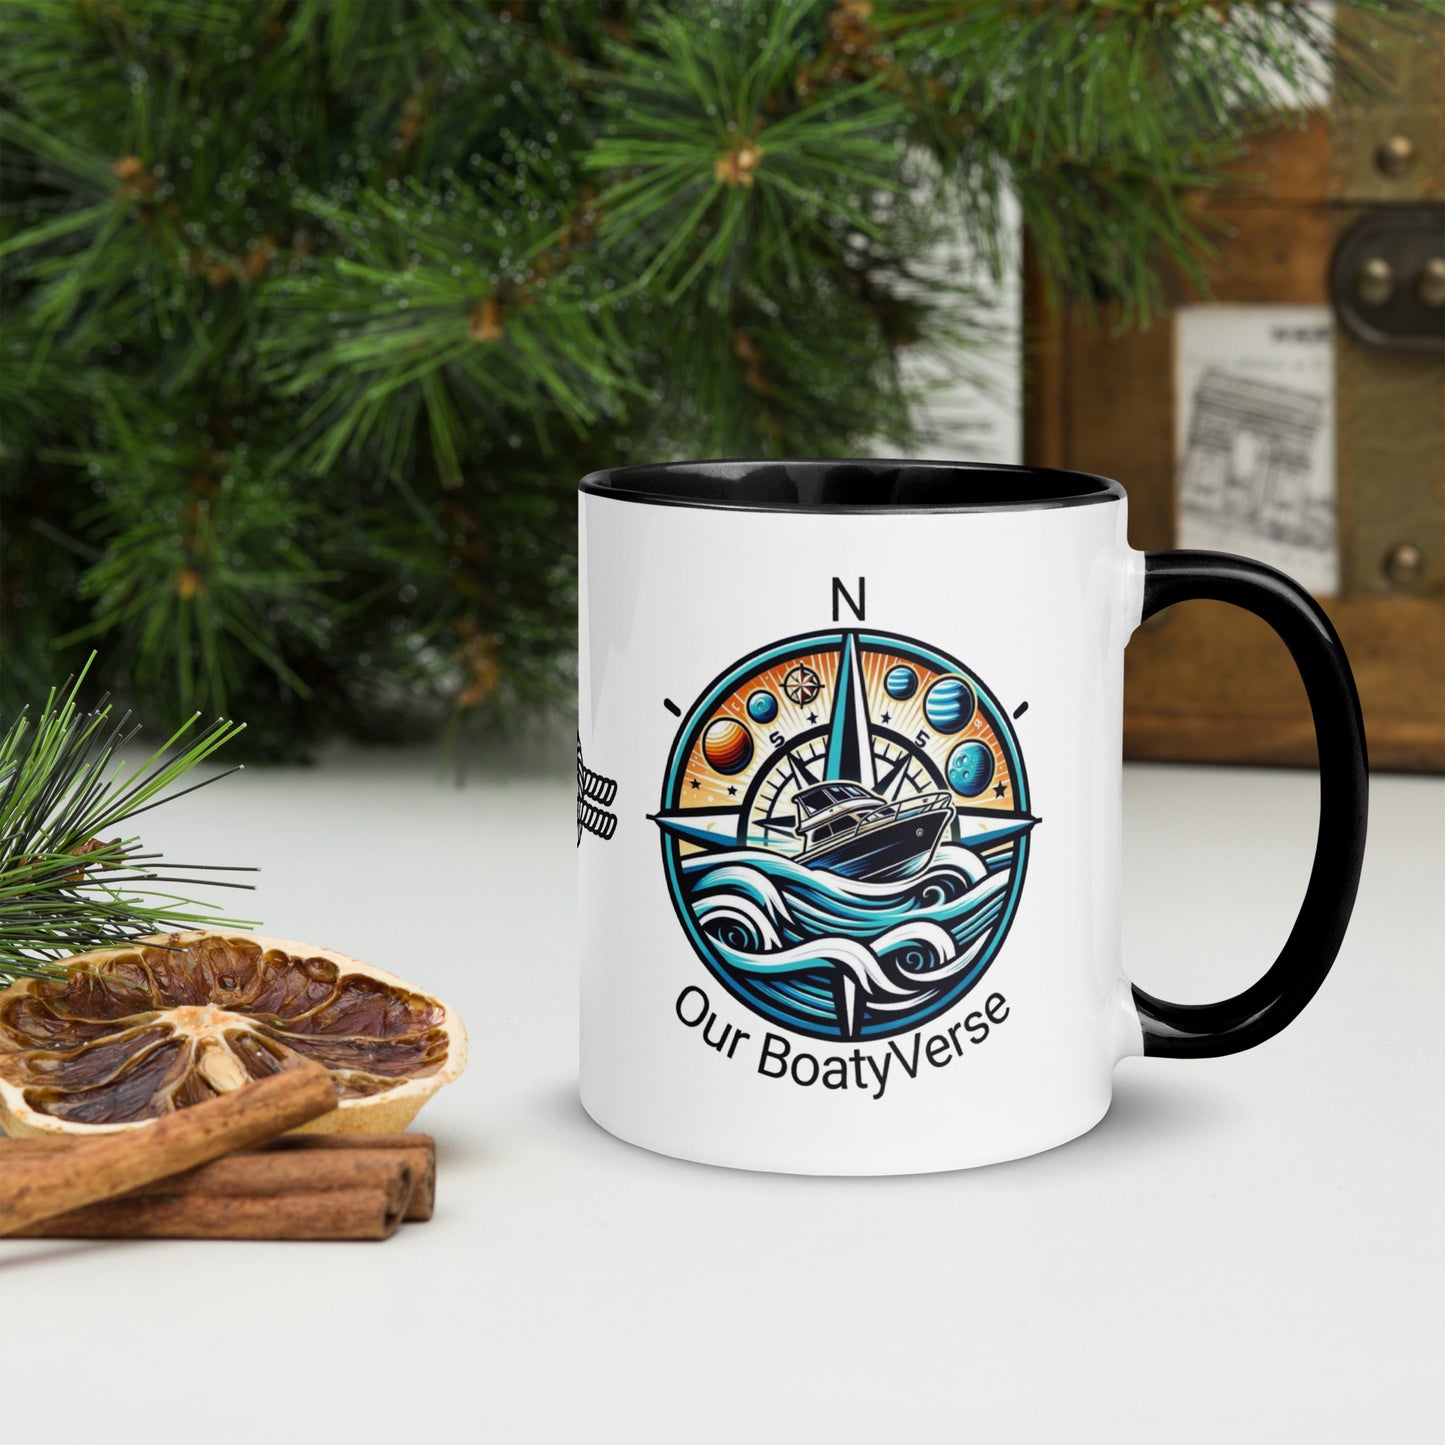 Our BoatyVerse Mug with Colour Inside